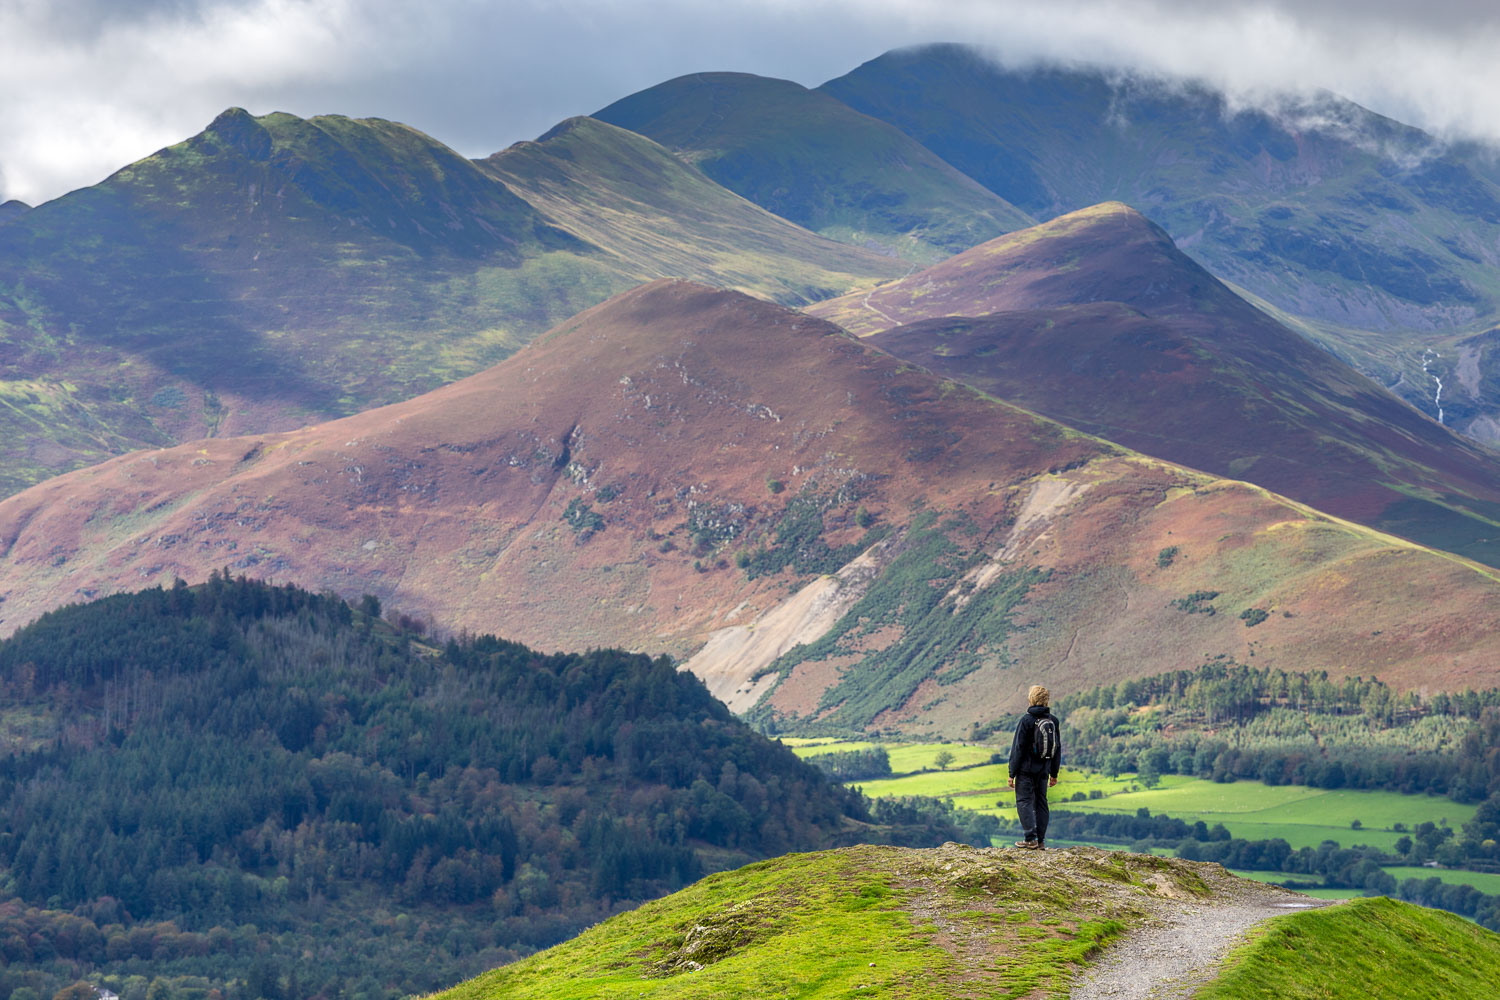 Causey Pike, Barrow and Outerside (not forgetting Gilly) from Latrigg today #keswick #lakedistrict #cumbria